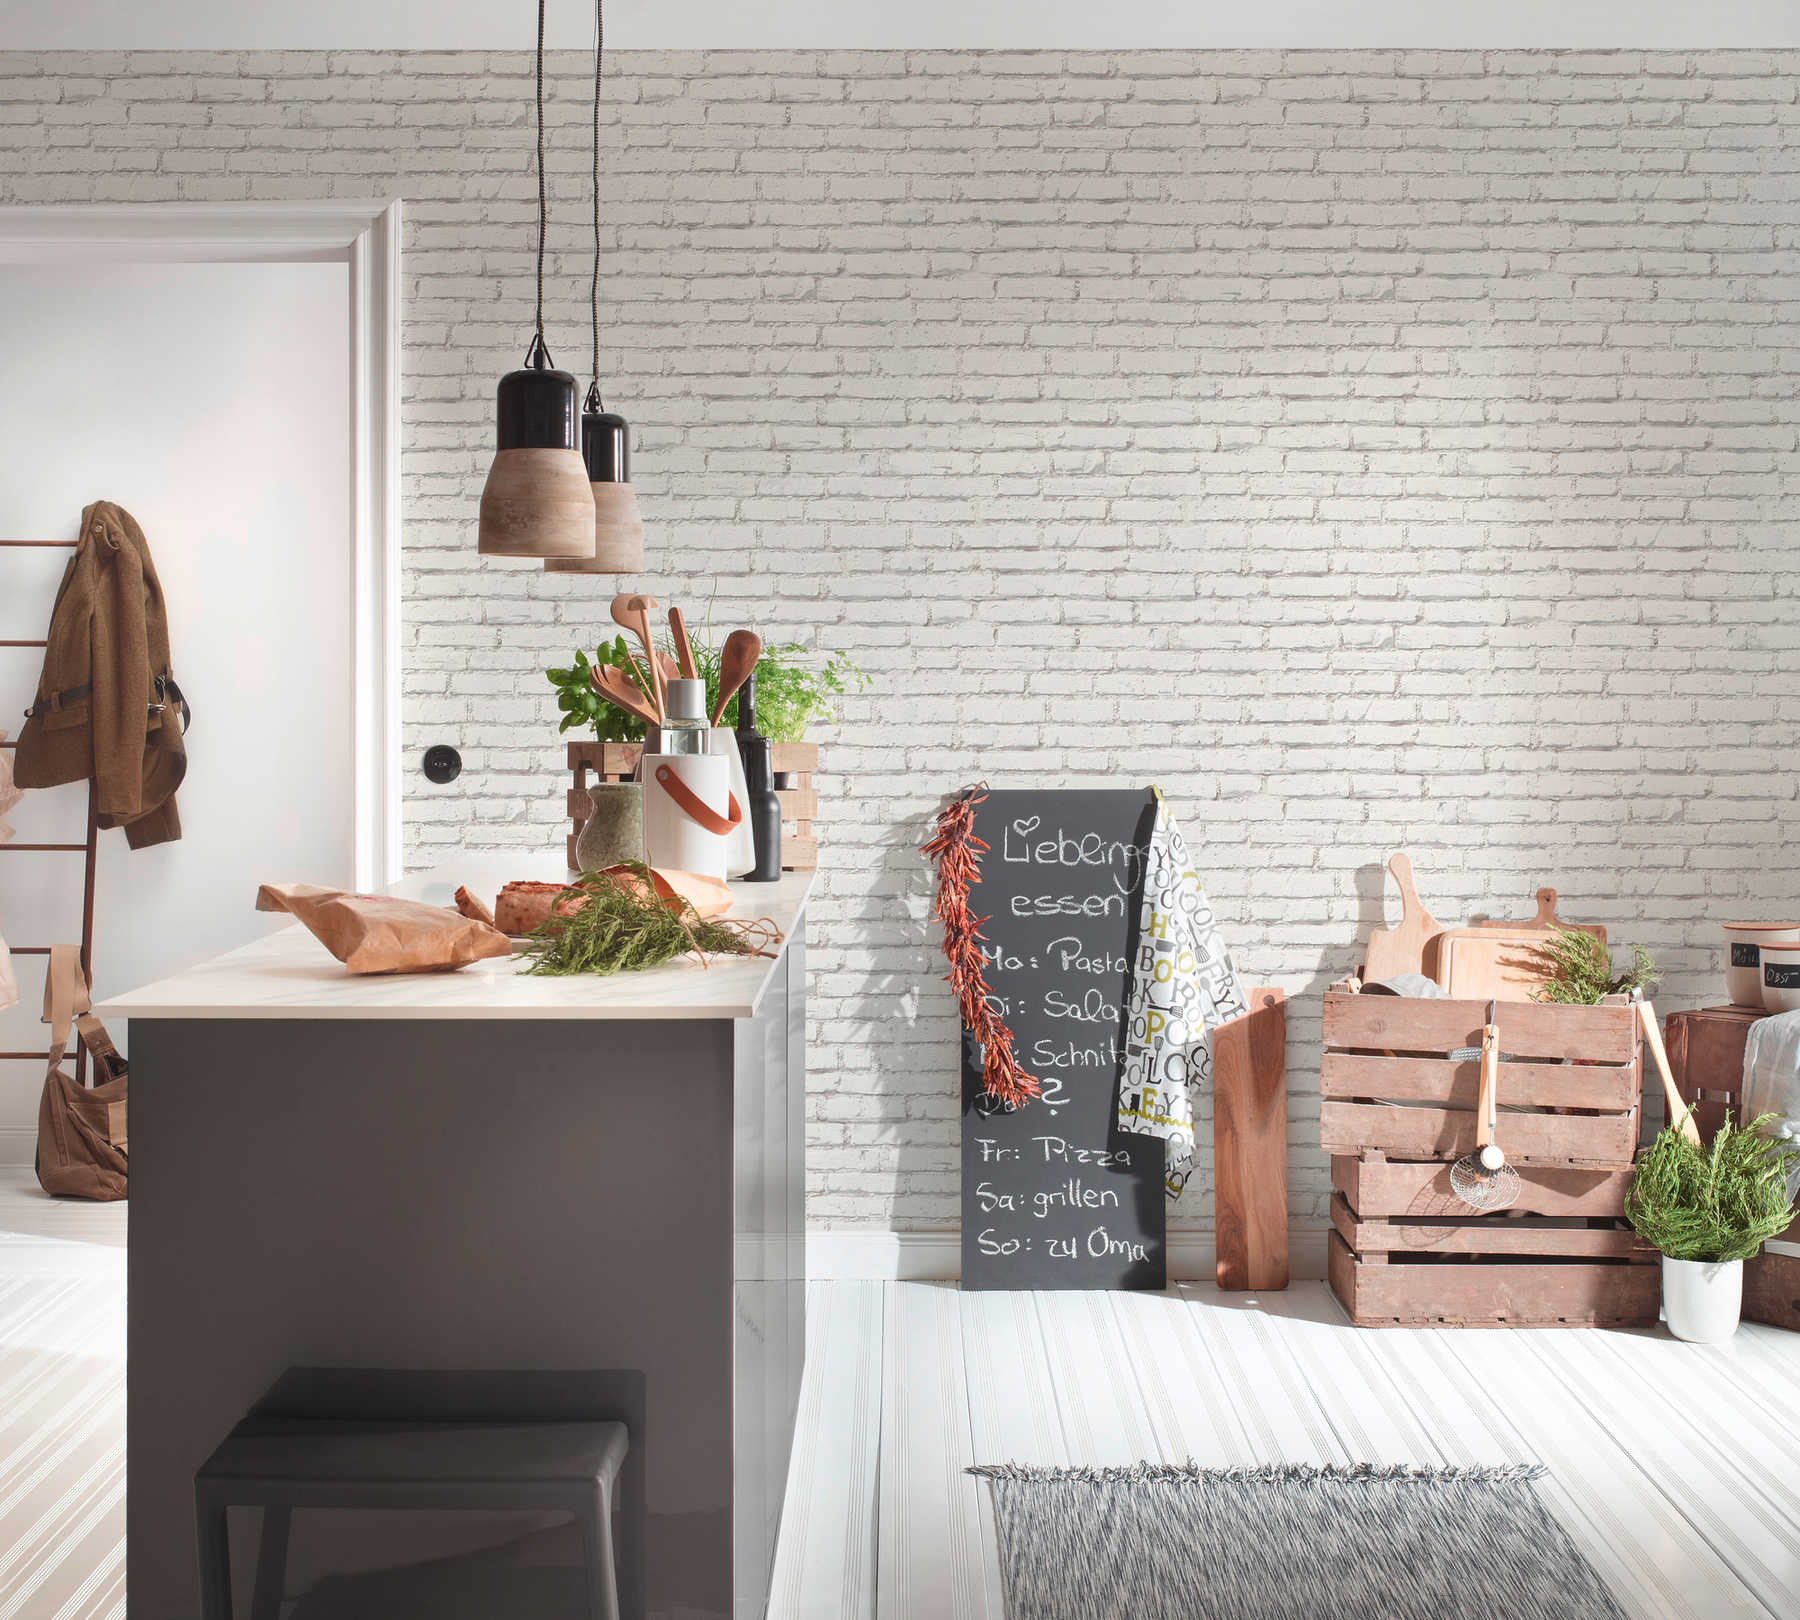             Wallpaper with brick wall with white stones and joints - white, grey
        